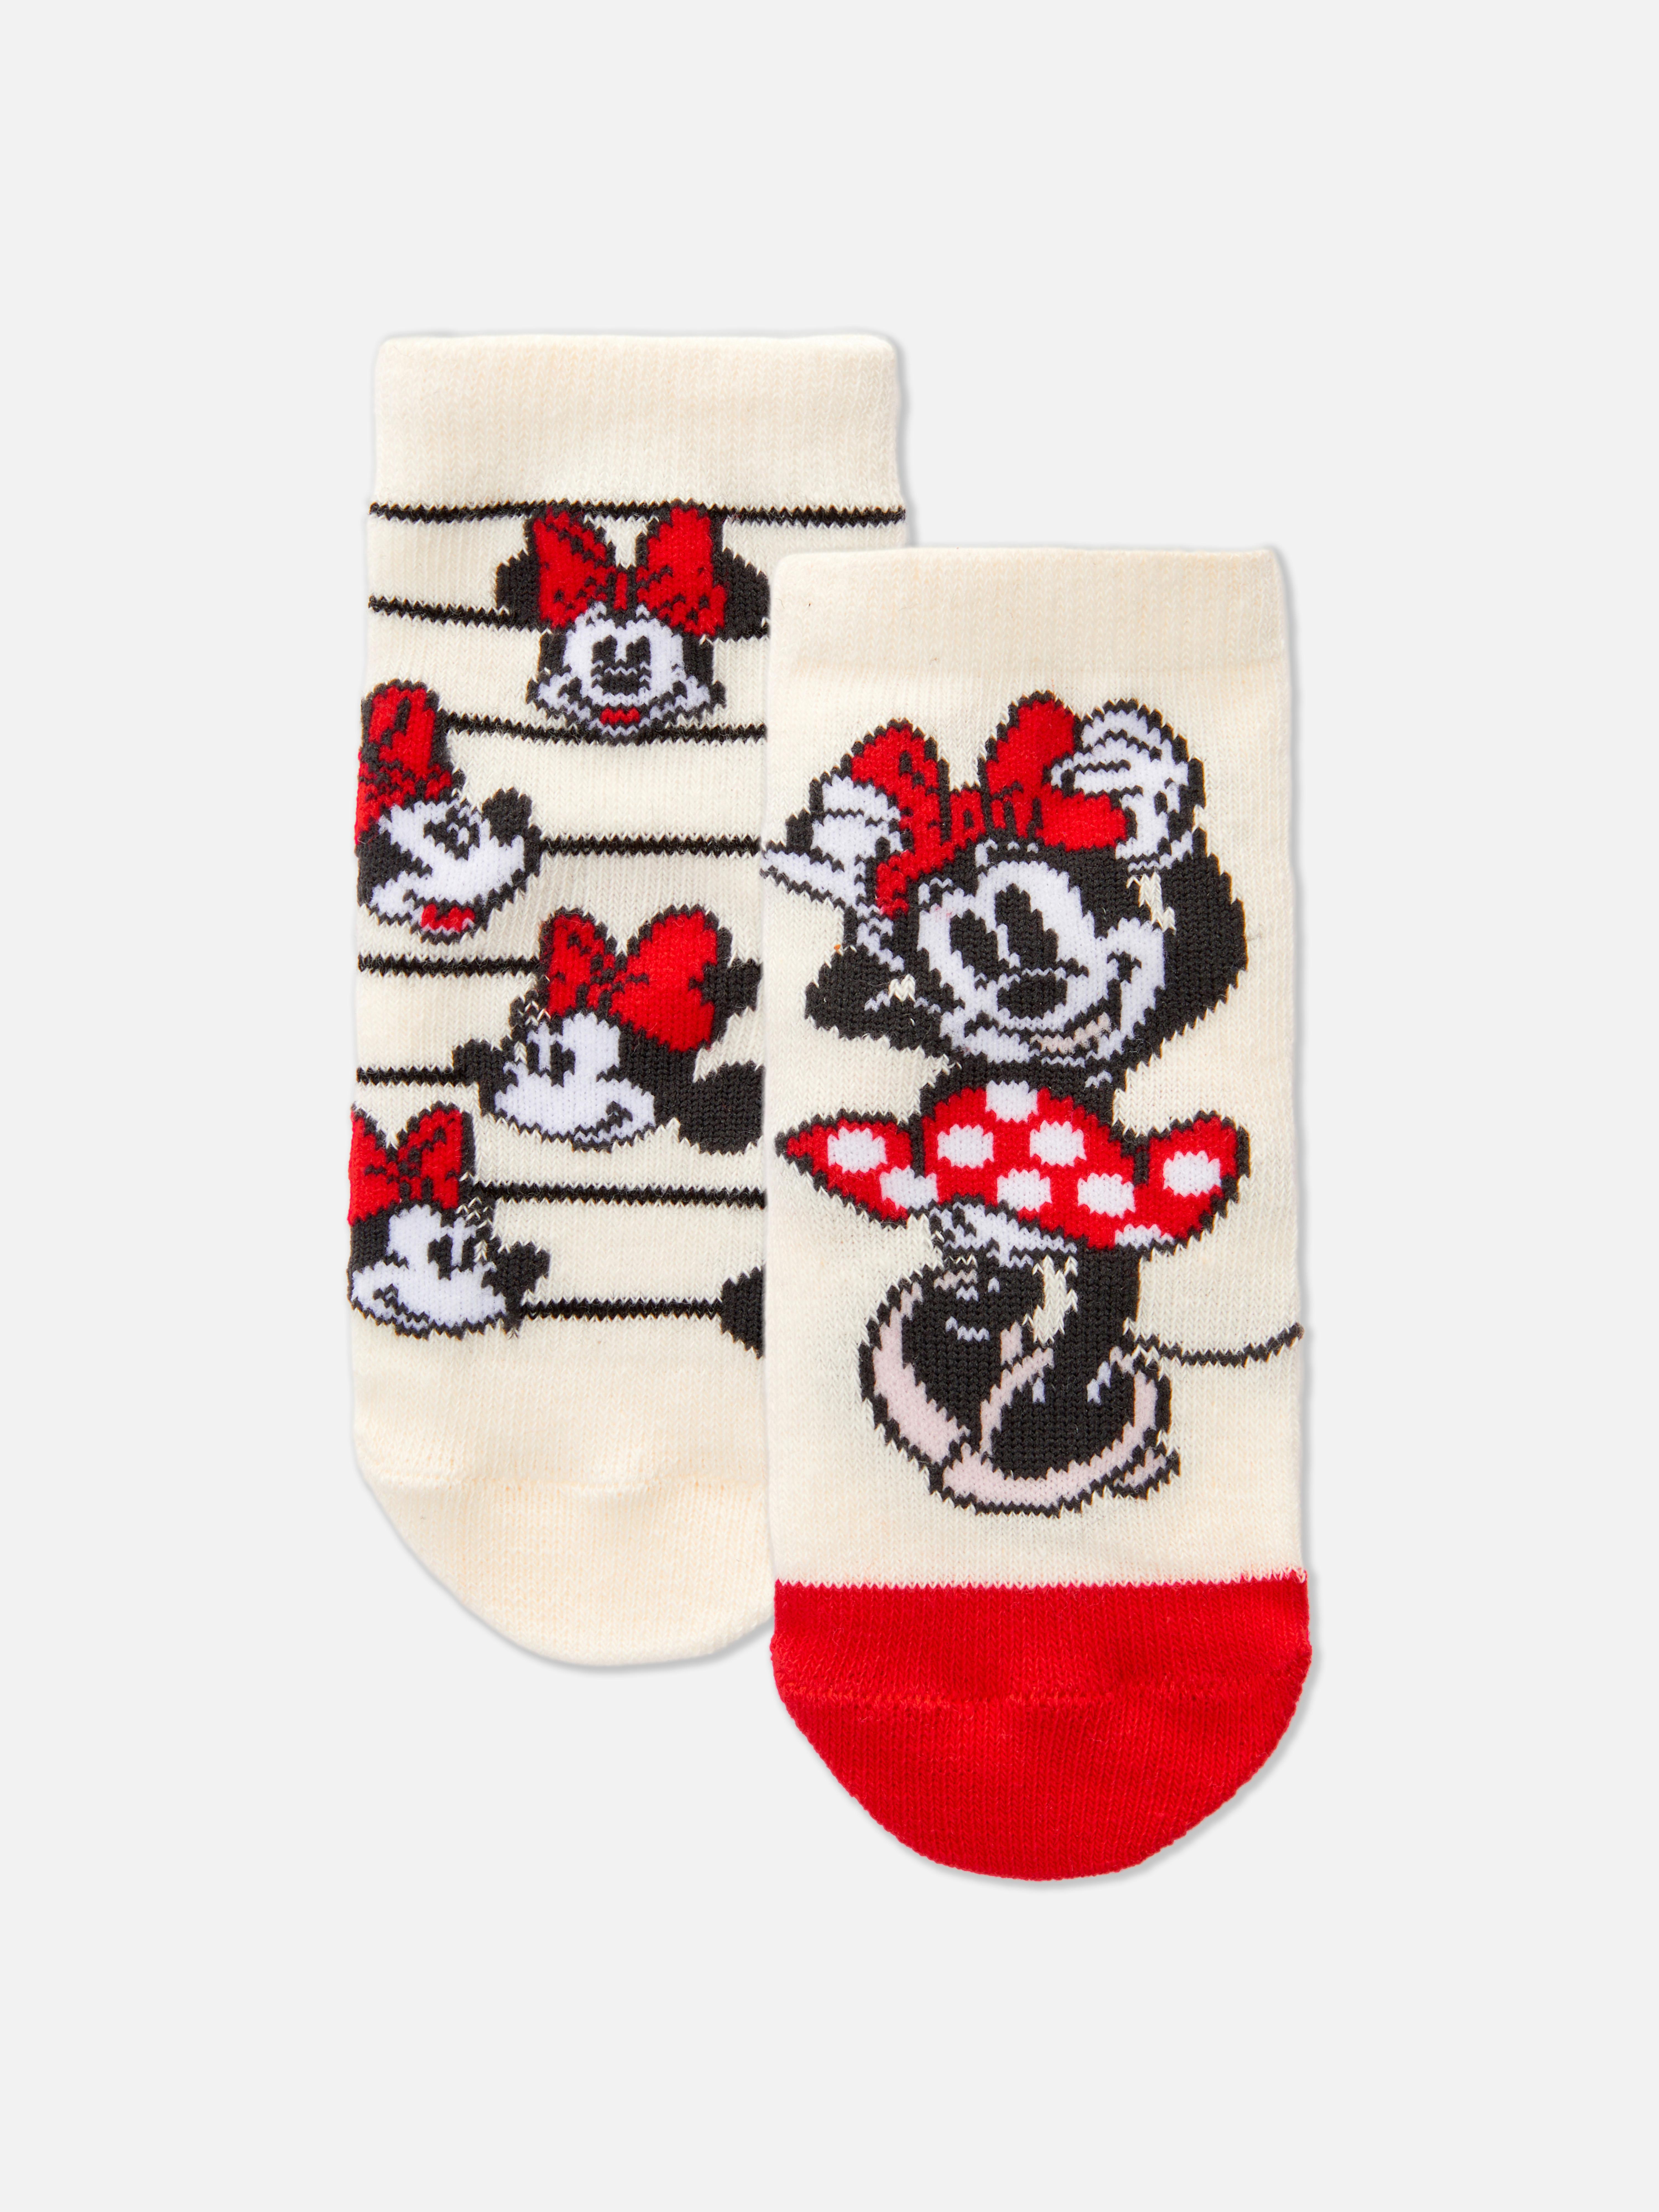 2-Pack Disney’s Minnie Mouse Baby Socks